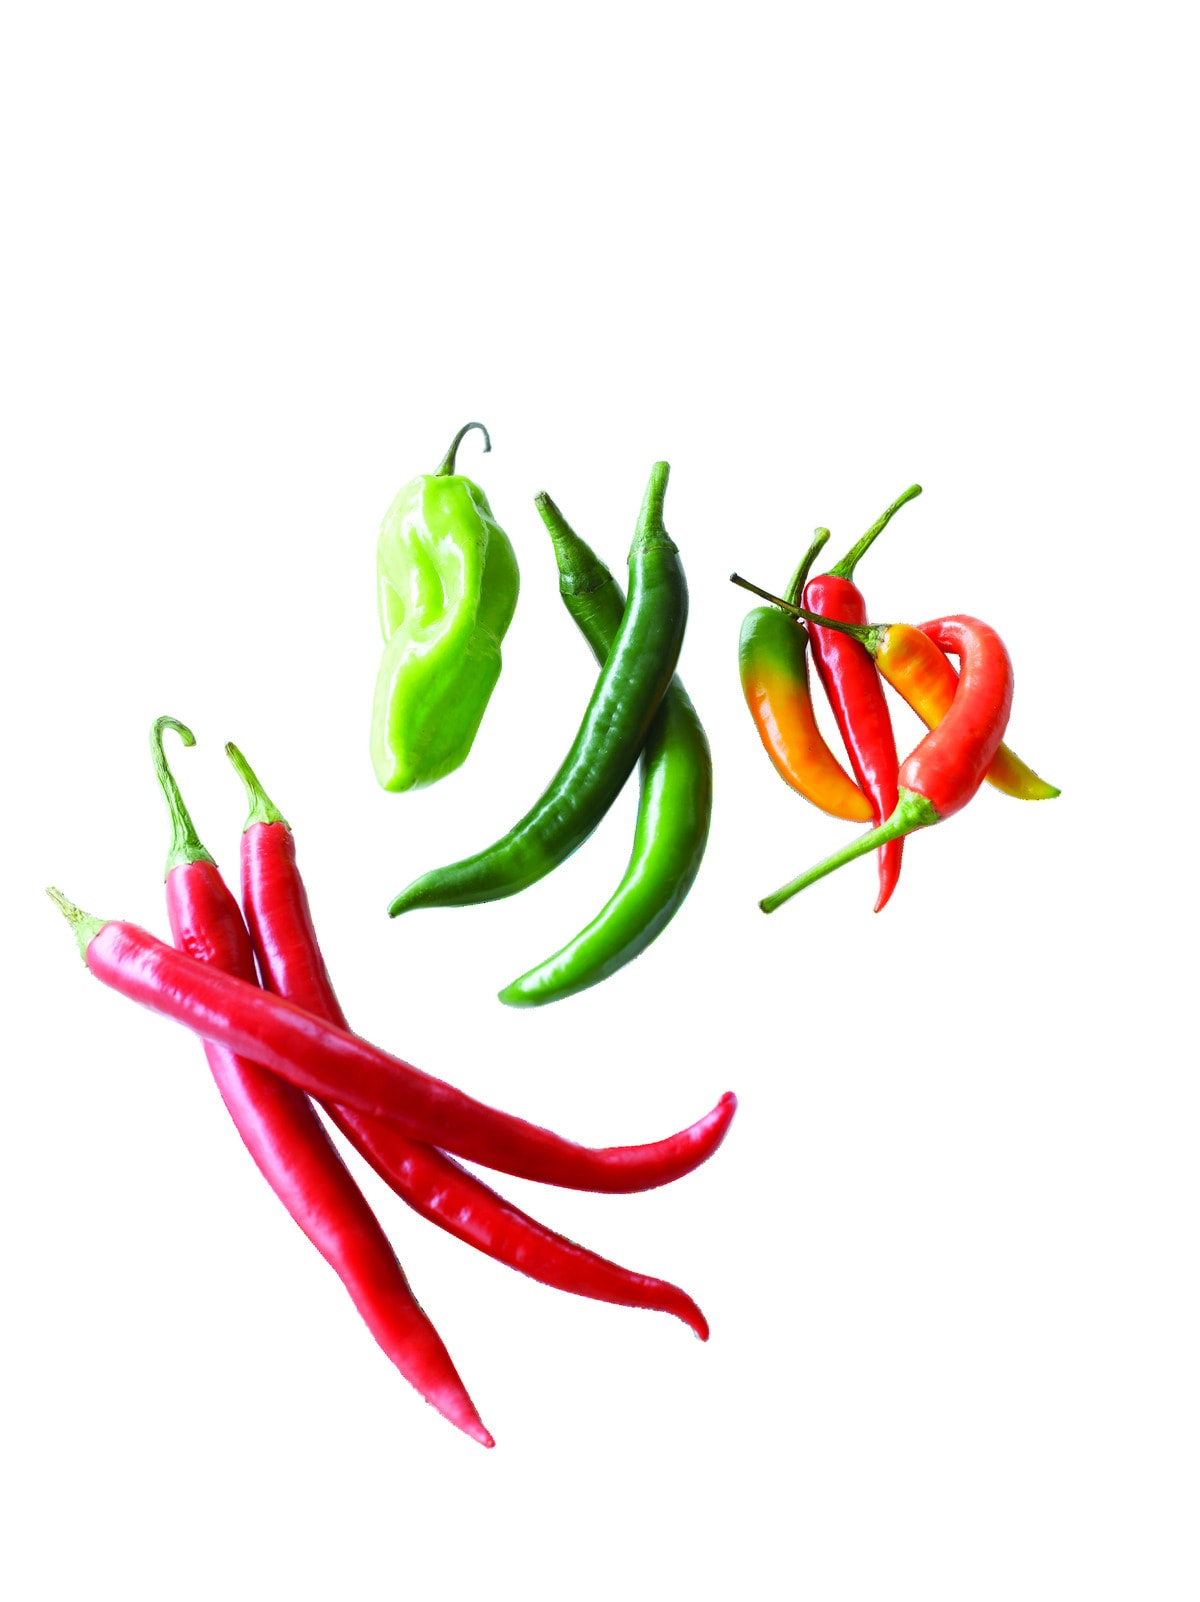 Chili Peppers Too Mild: Why Are My Chilies Not Getting Hot